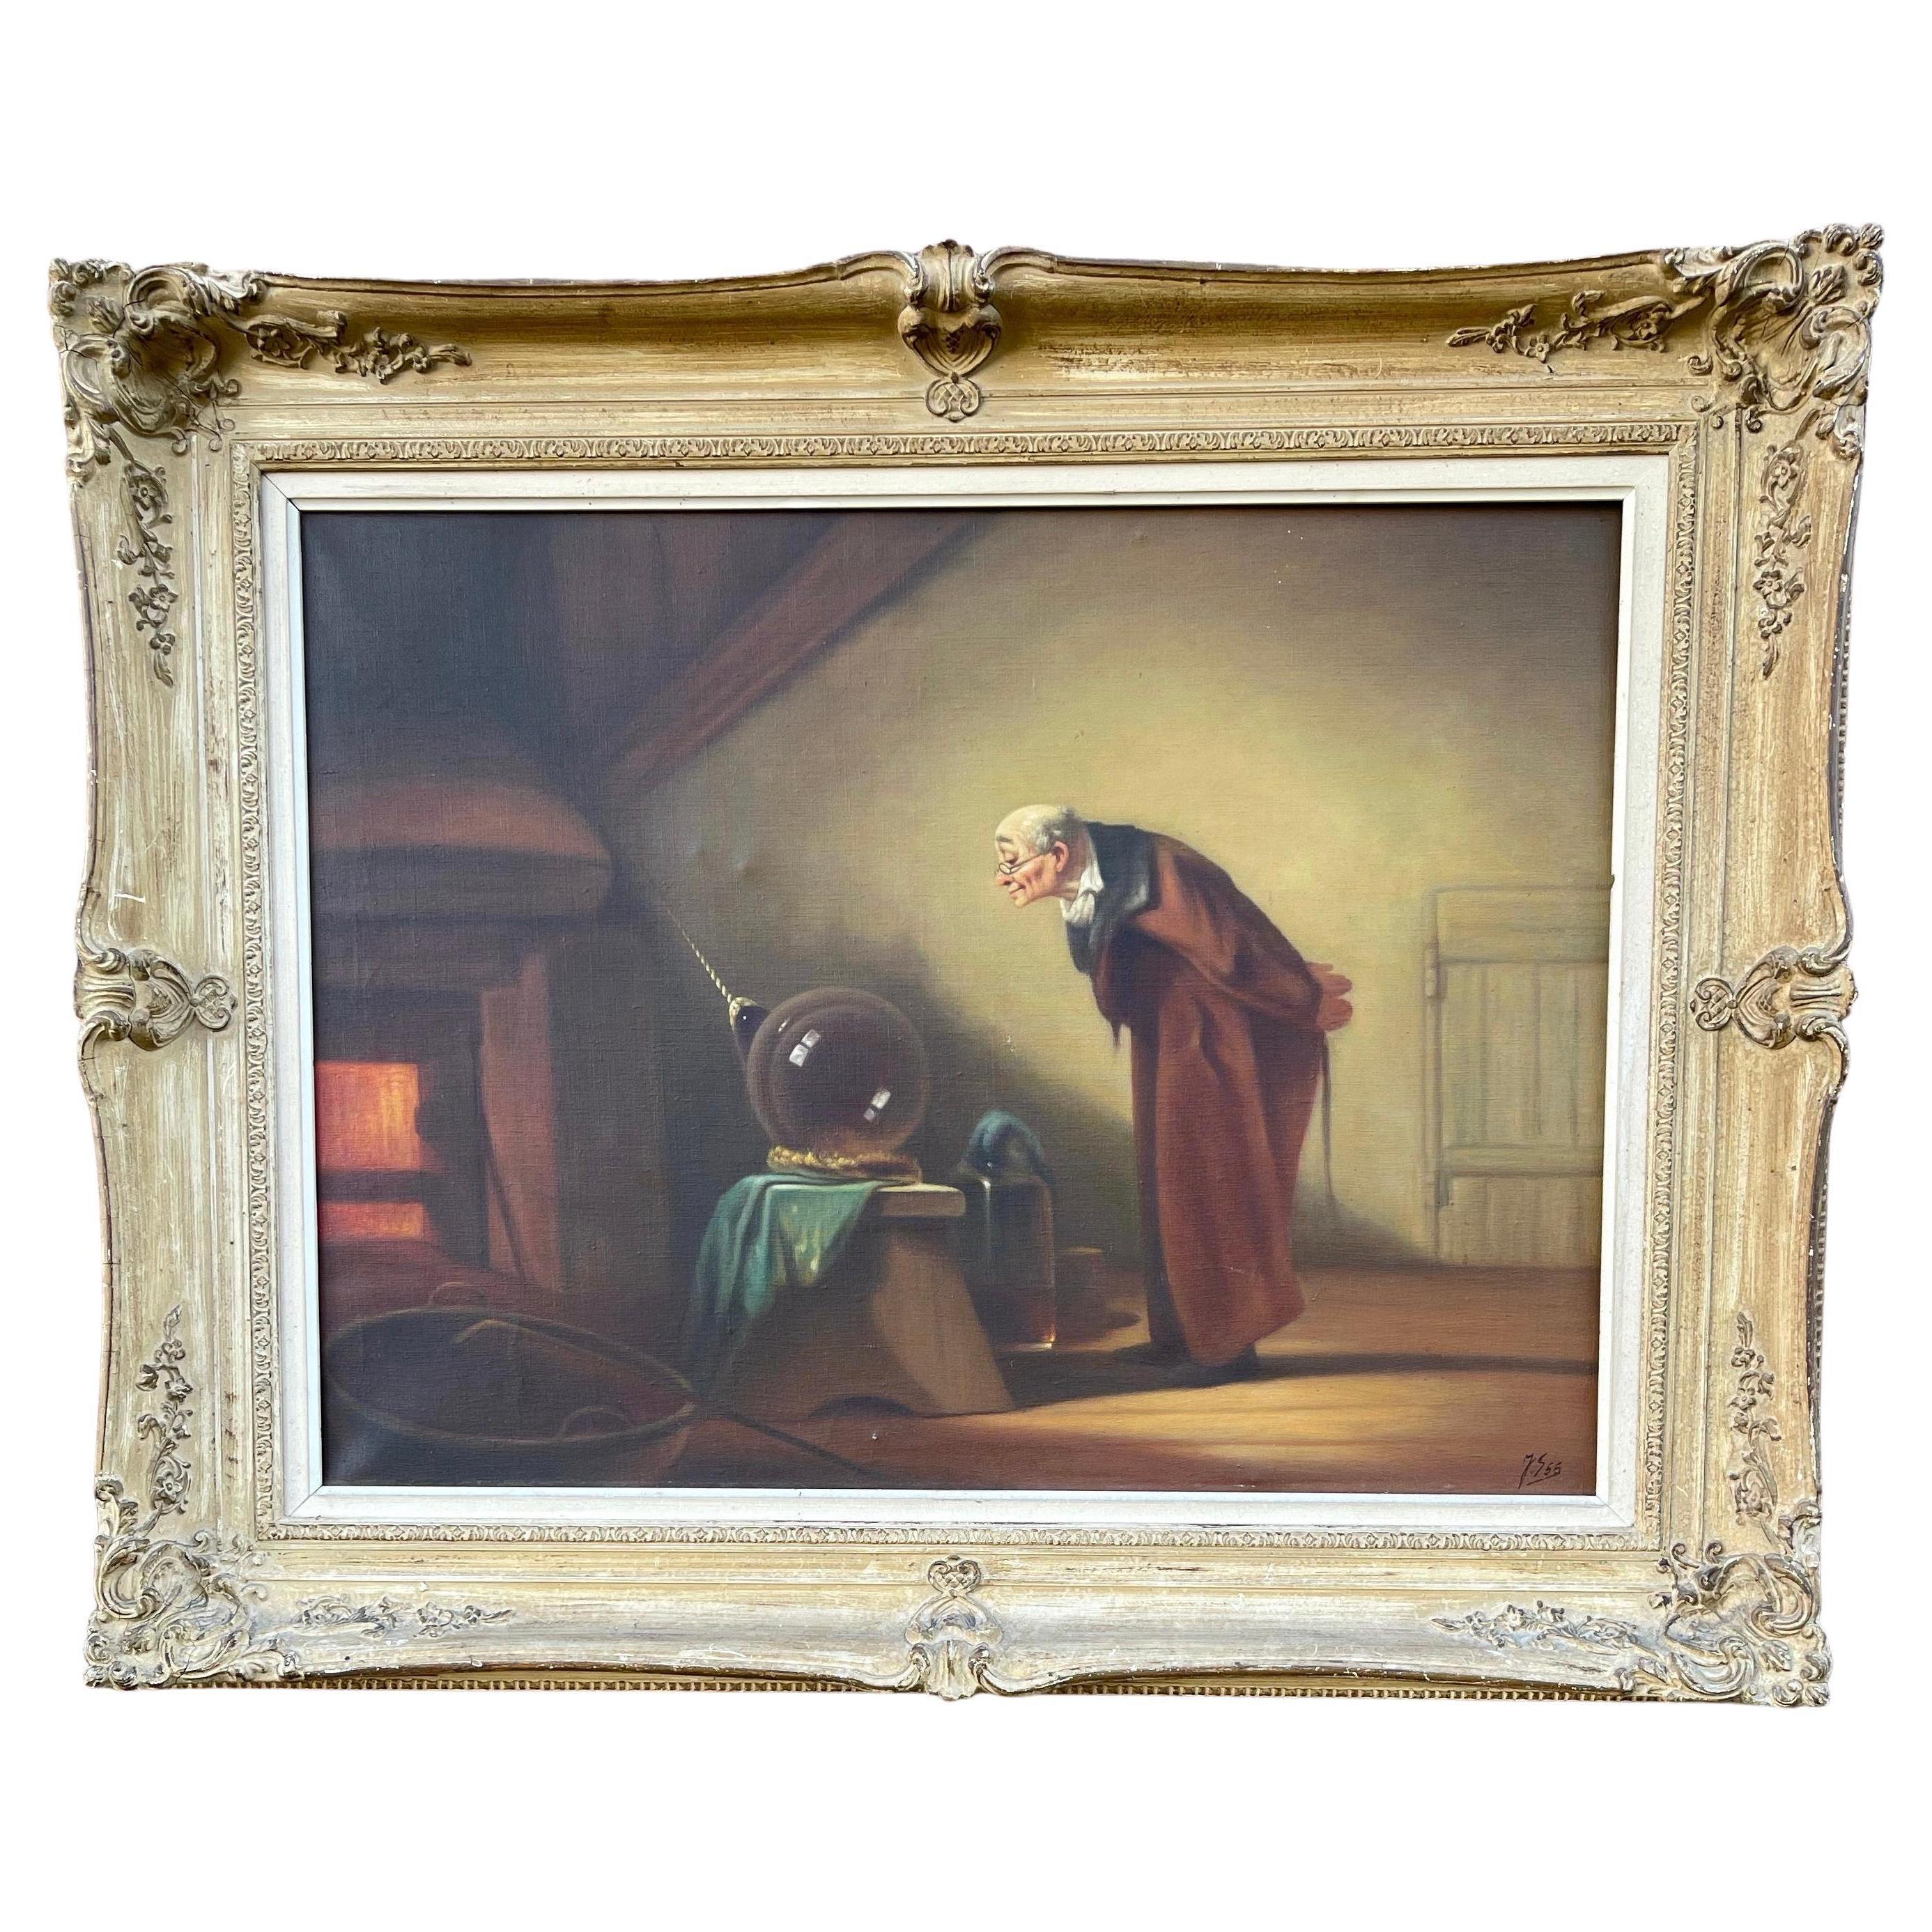 Large Hand Painted Oil on Canvas Painting "The Alchemist" After Carl Spitzweg